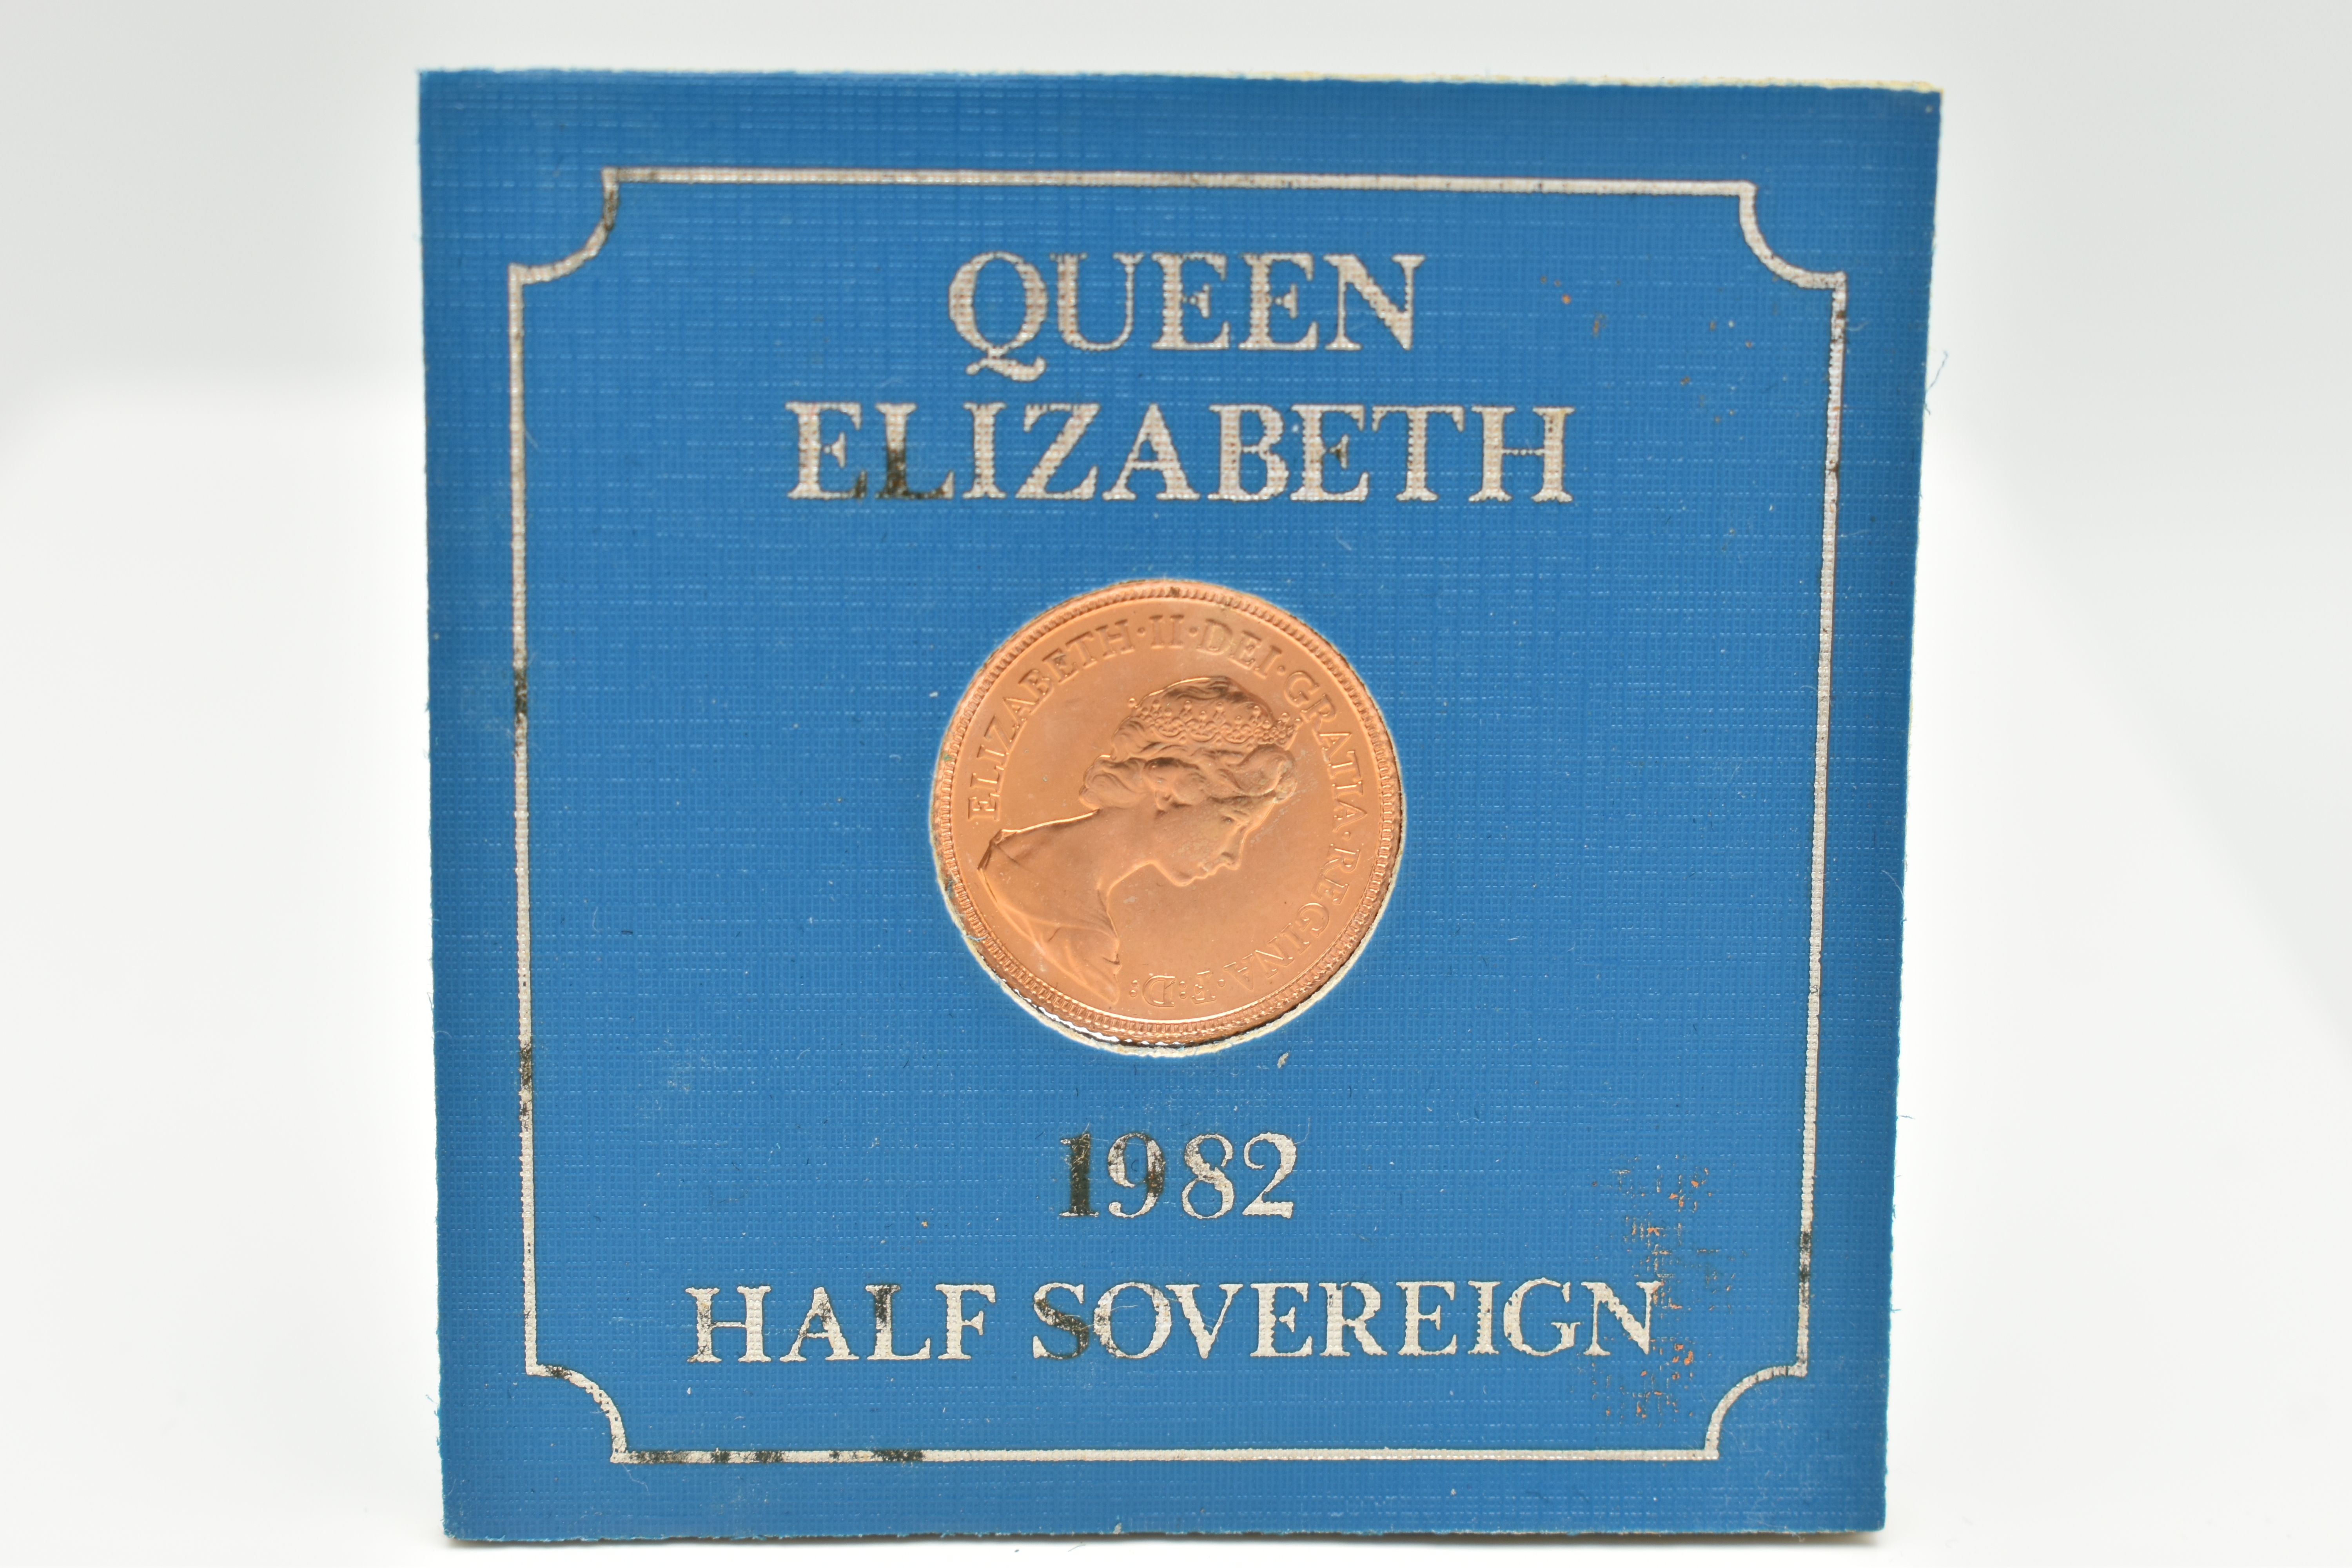 A QUEEN ELIZABETH II 1982 GOLD HALF SOVEREIGN COIN CARDED, By Barclays Bank - Image 2 of 2